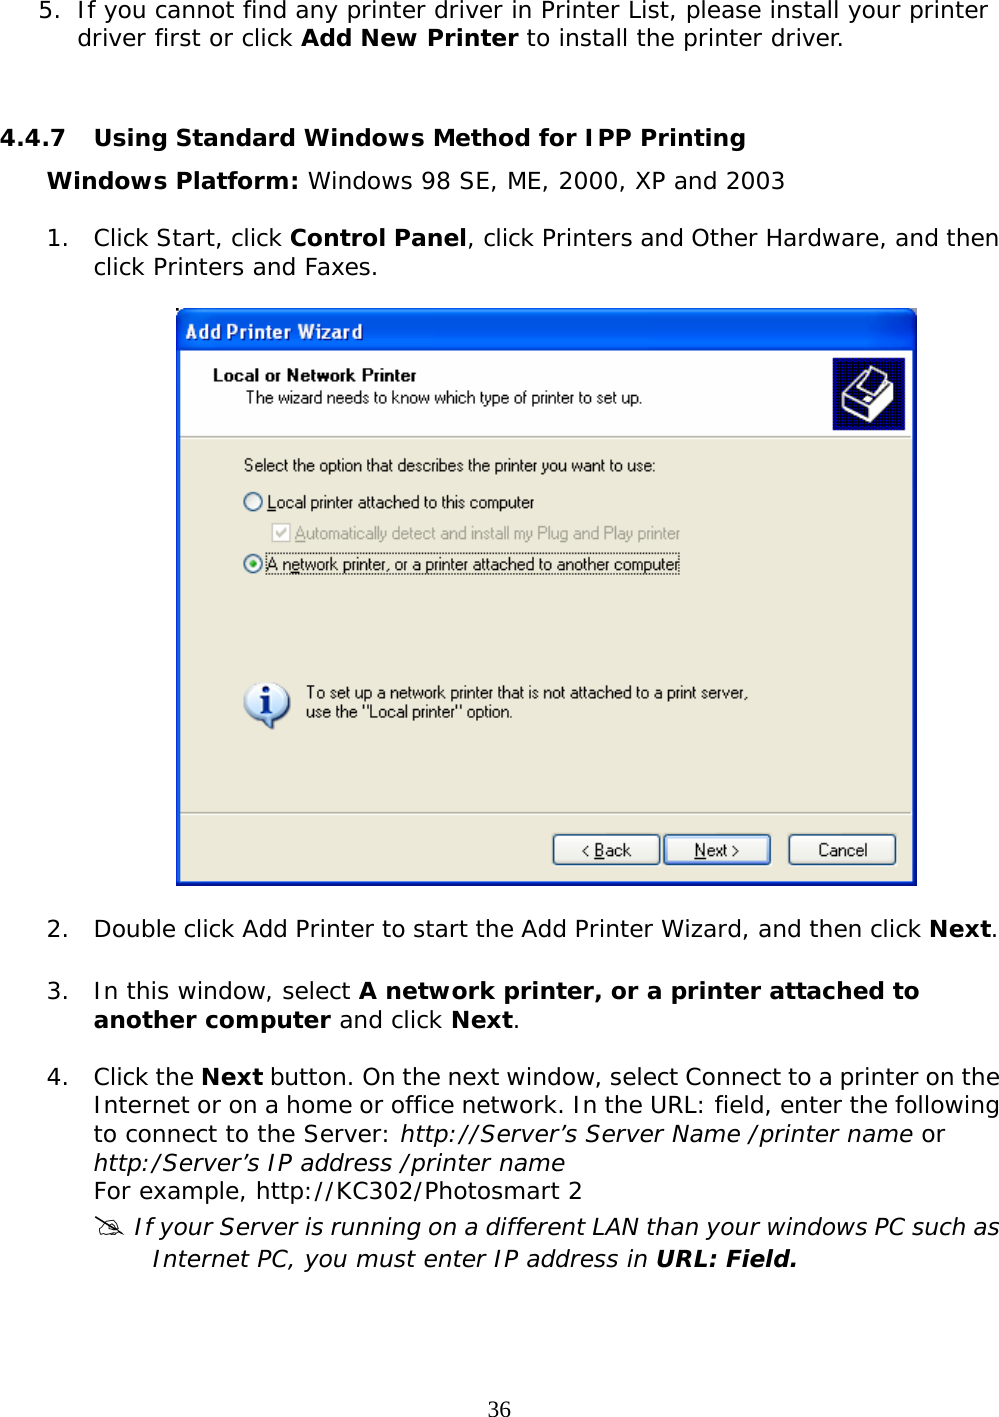     36 5. If you cannot find any printer driver in Printer List, please install your printer driver first or click Add New Printer to install the printer driver.   4.4.7  Using Standard Windows Method for IPP Printing Windows Platform: Windows 98 SE, ME, 2000, XP and 2003 1. Click Start, click Control Panel, click Printers and Other Hardware, and then click Printers and Faxes.    2. Double click Add Printer to start the Add Printer Wizard, and then click Next.  3. In this window, select A network printer, or a printer attached to another computer and click Next.  4. Click the Next button. On the next window, select Connect to a printer on the Internet or on a home or office network. In the URL: field, enter the following to connect to the Server: http://Server’s Server Name /printer name or http:/Server’s IP address /printer name  For example, http://KC302/Photosmart 2 # If your Server is running on a different LAN than your windows PC such as Internet PC, you must enter IP address in URL: Field.  